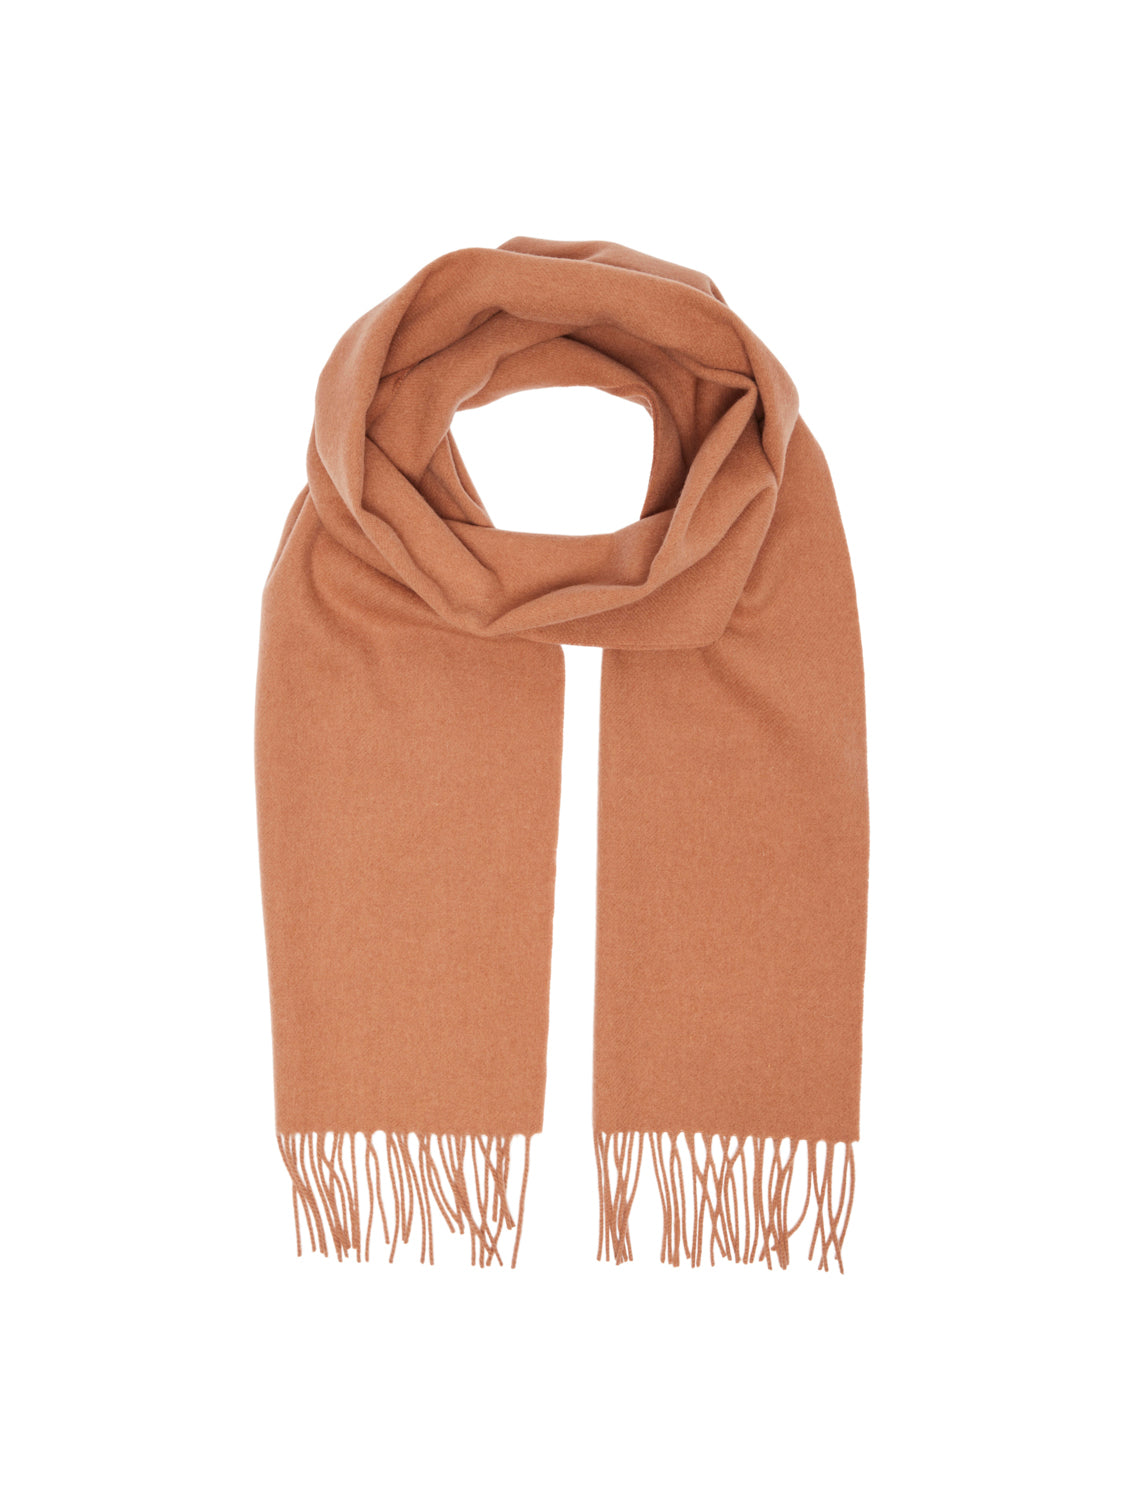 SLHTOPE Scarf - Monks Robe